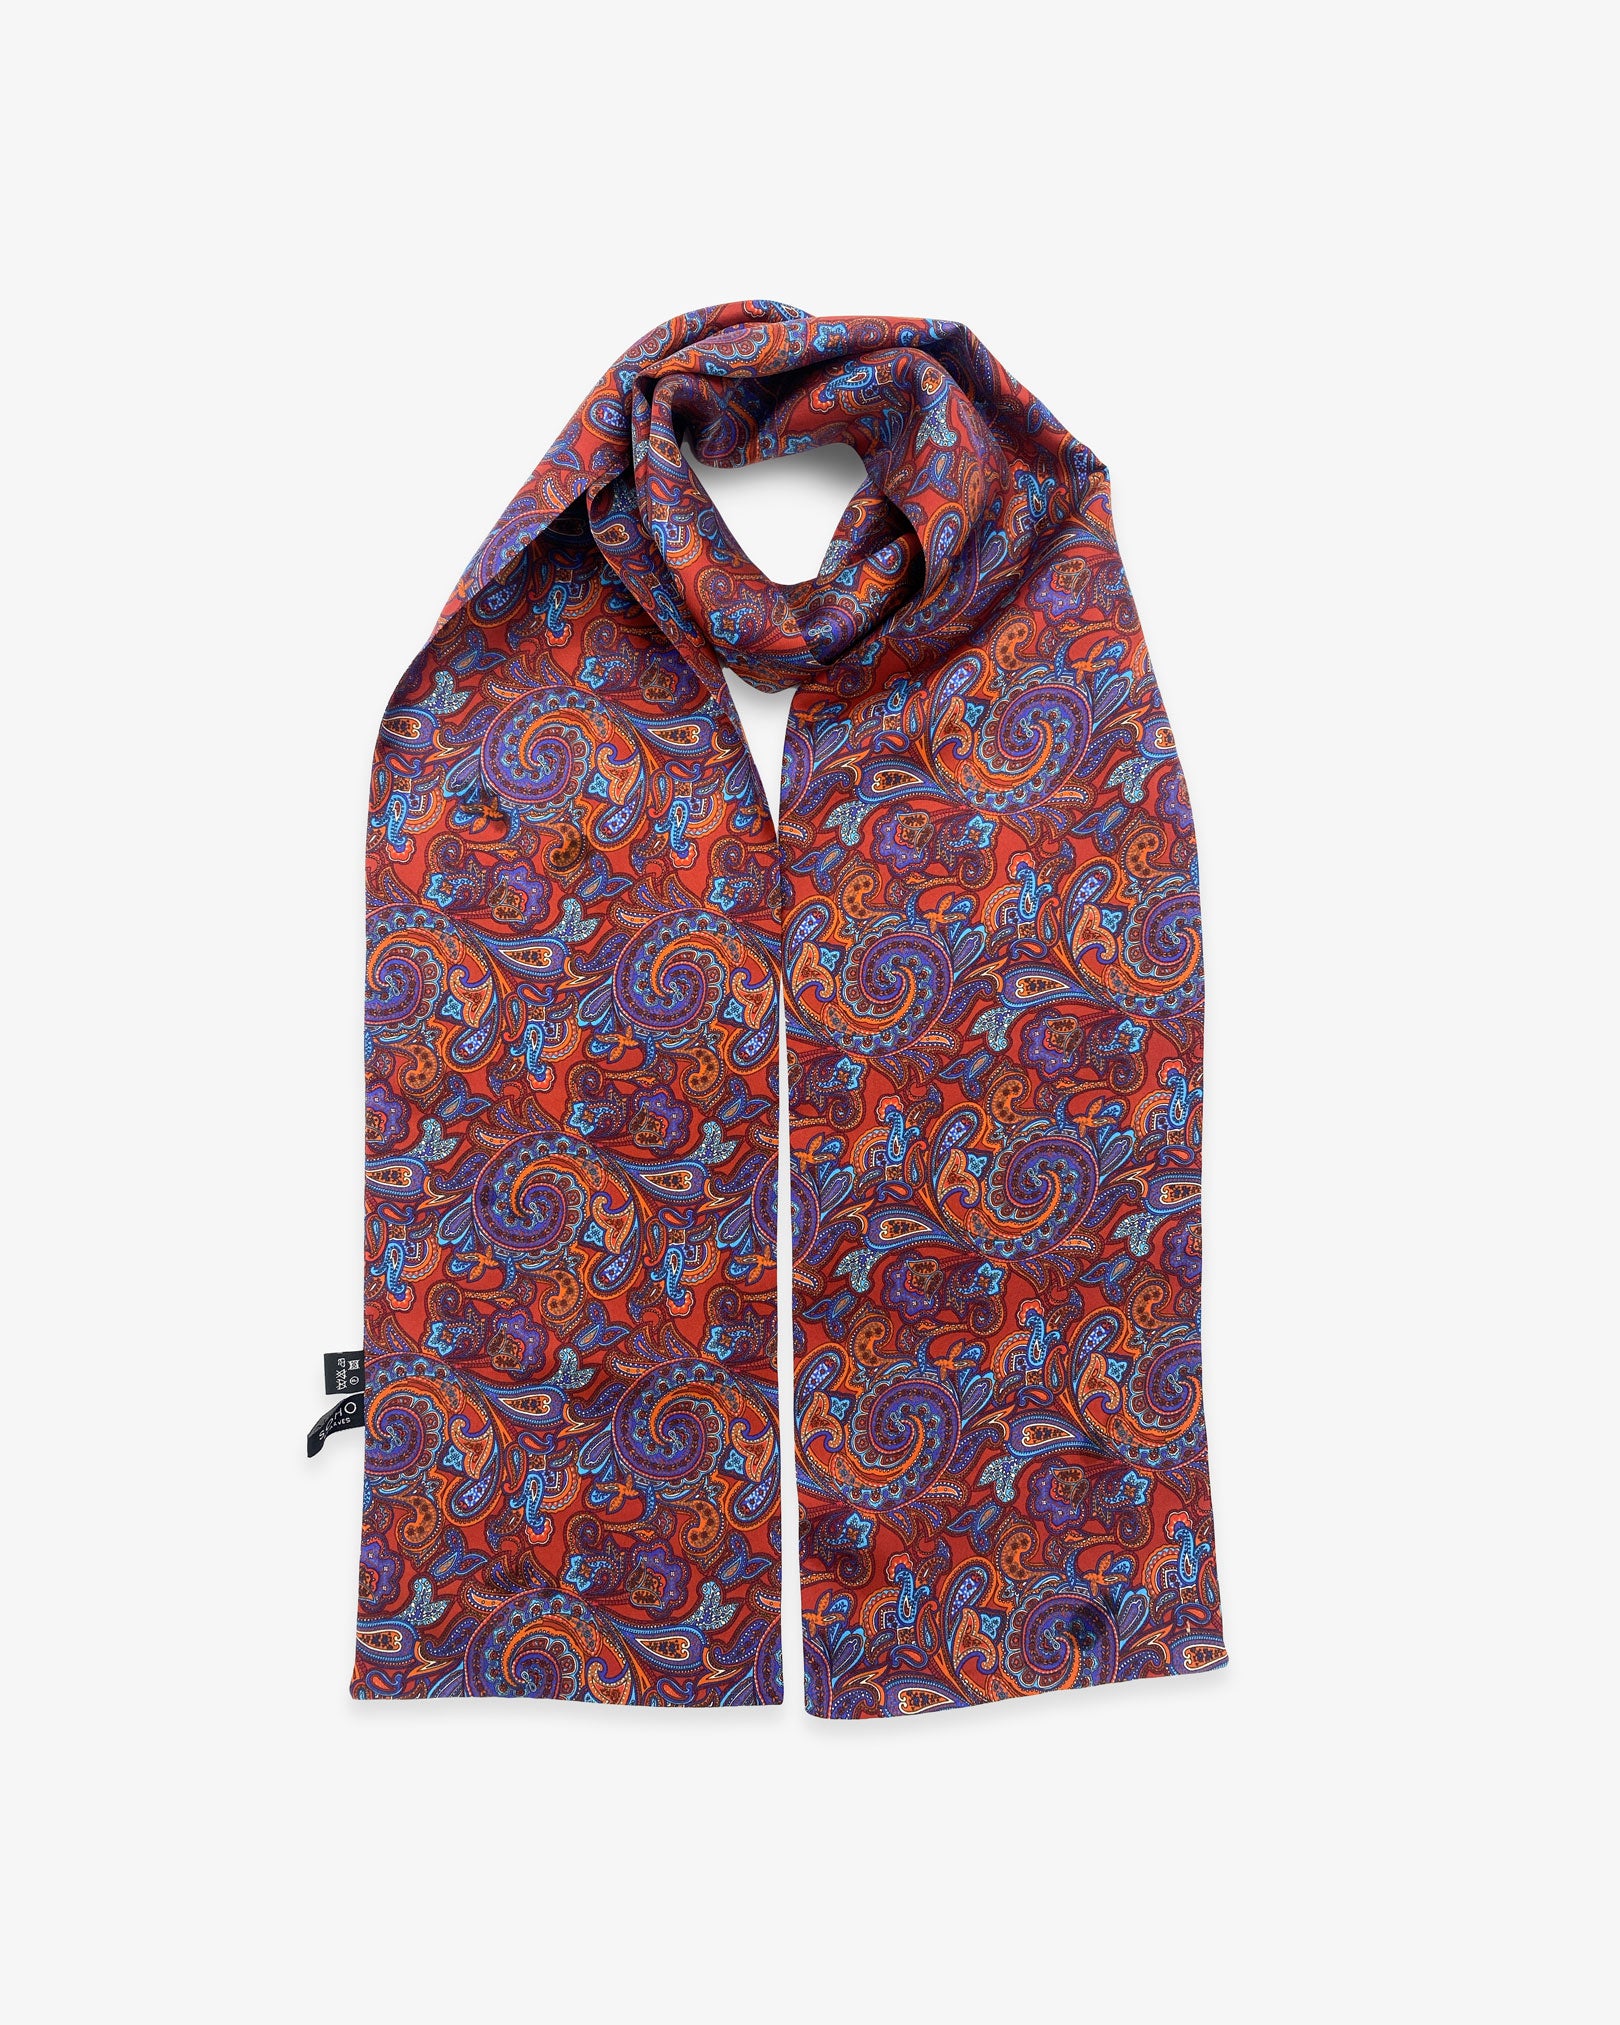 The Bretton pure silk paisley scarf looped in middle with both ends parallel showing the blue paisley patterns on a deep reddish-brown ground. 